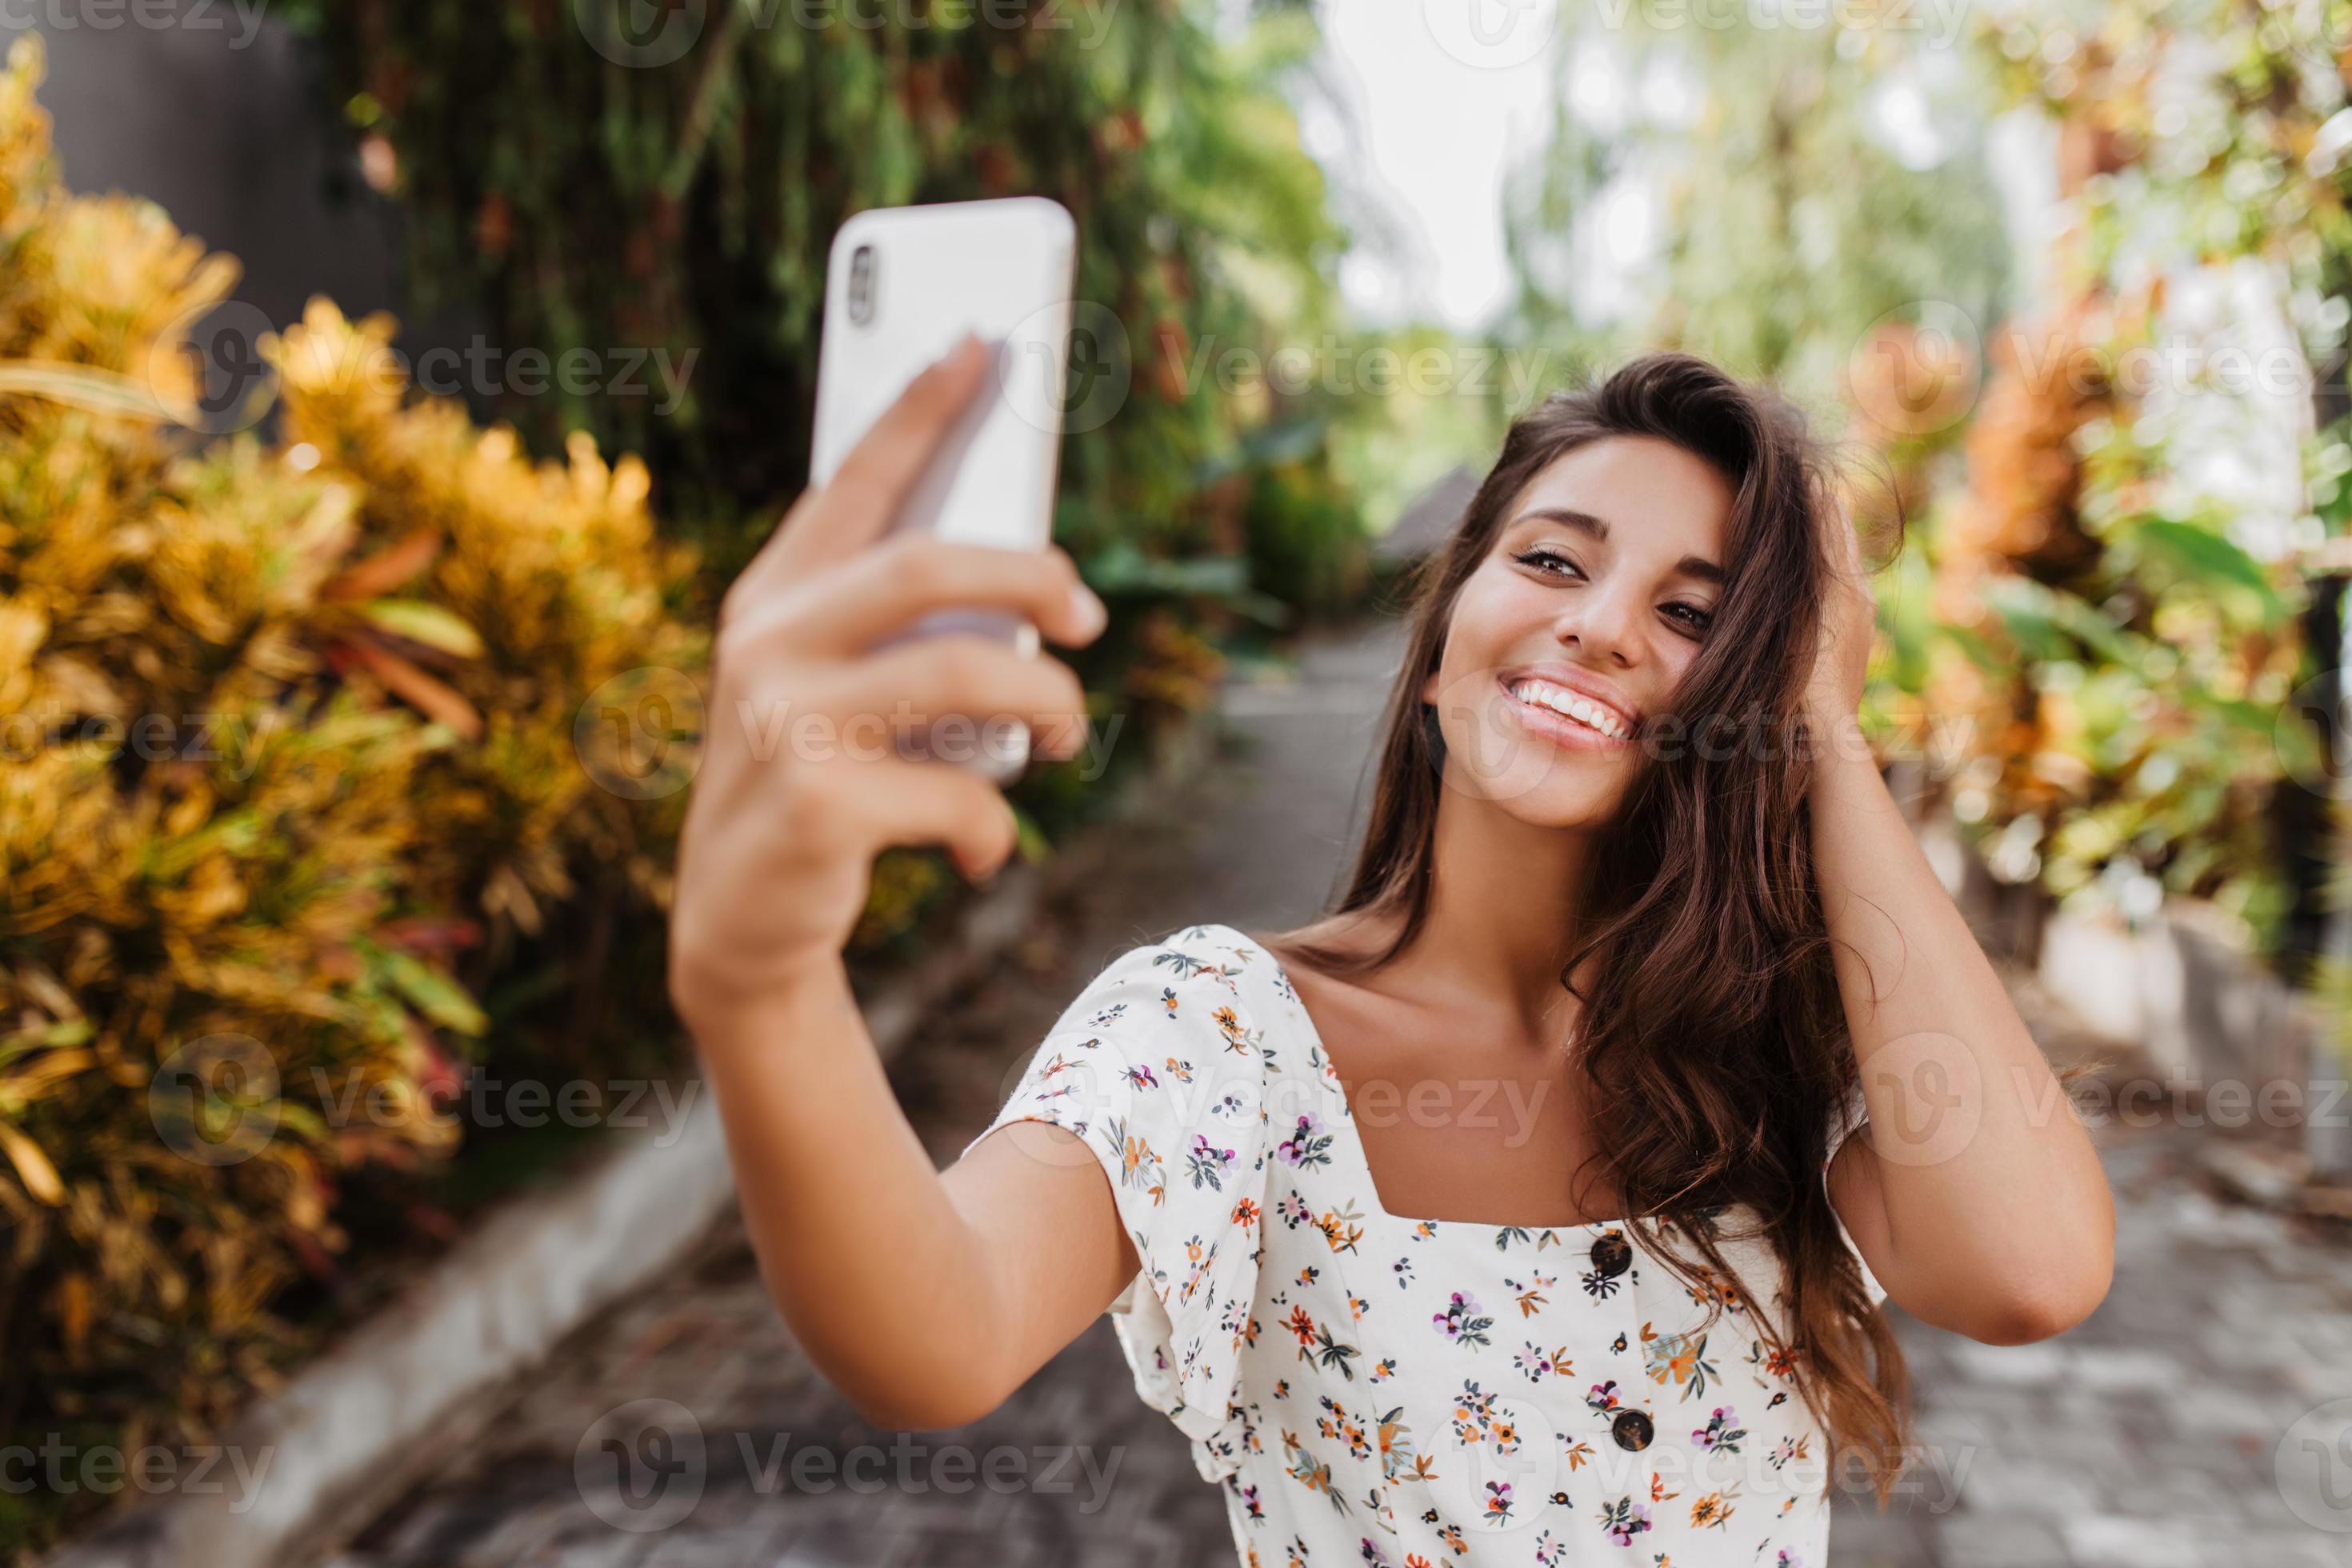 How To Take A Beautiful Selfie. Posing Ideas And Tips For Composition.